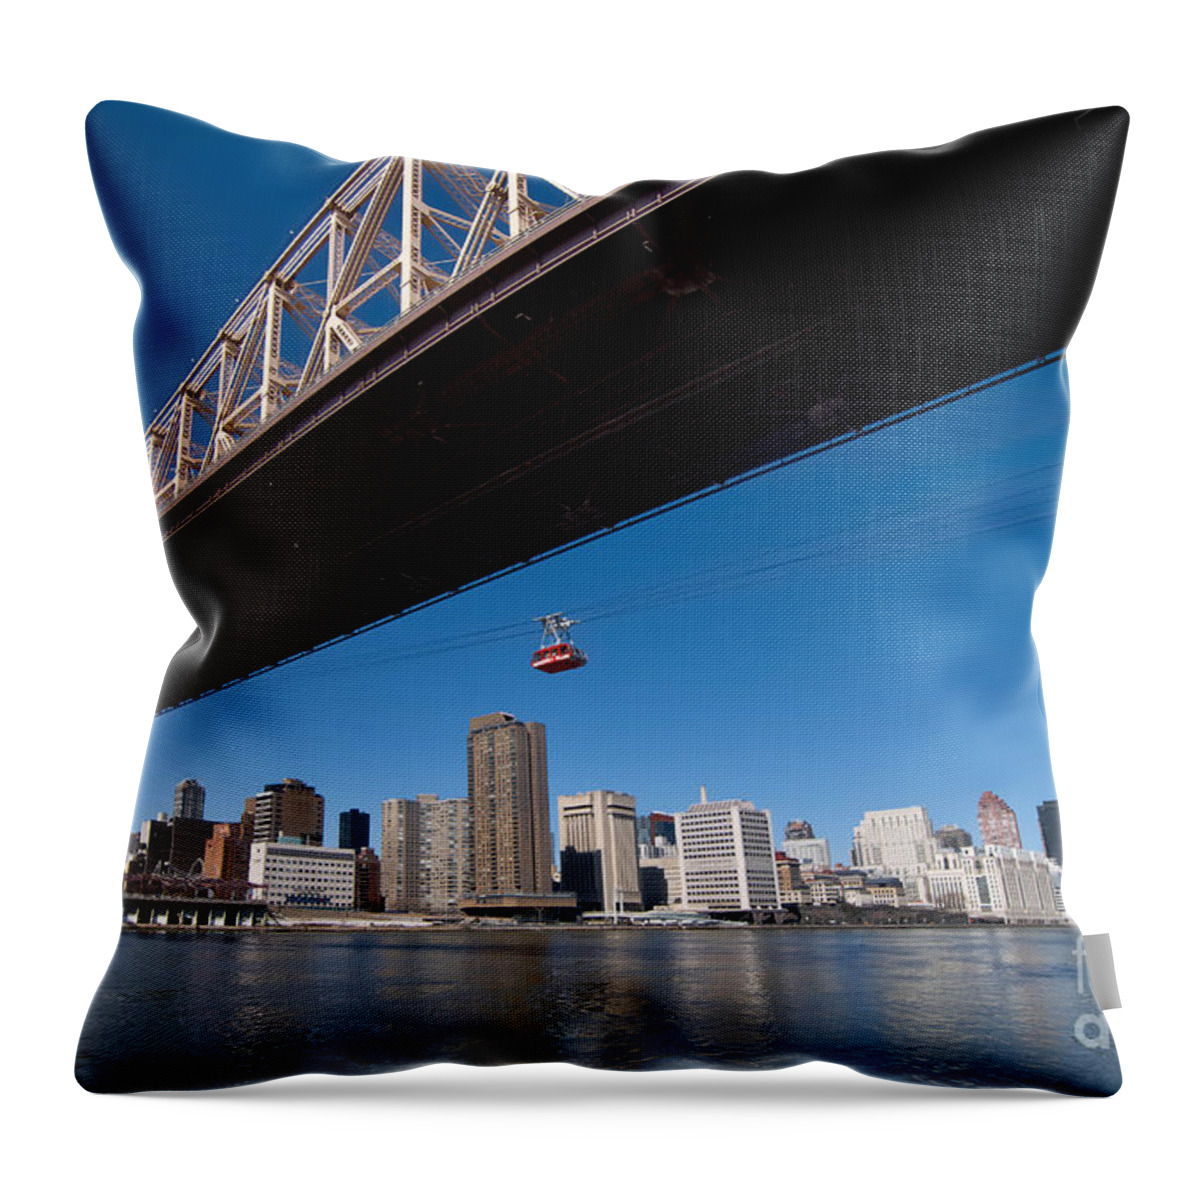 Bridge Throw Pillow featuring the photograph Randall Island Tram by Amy Cicconi